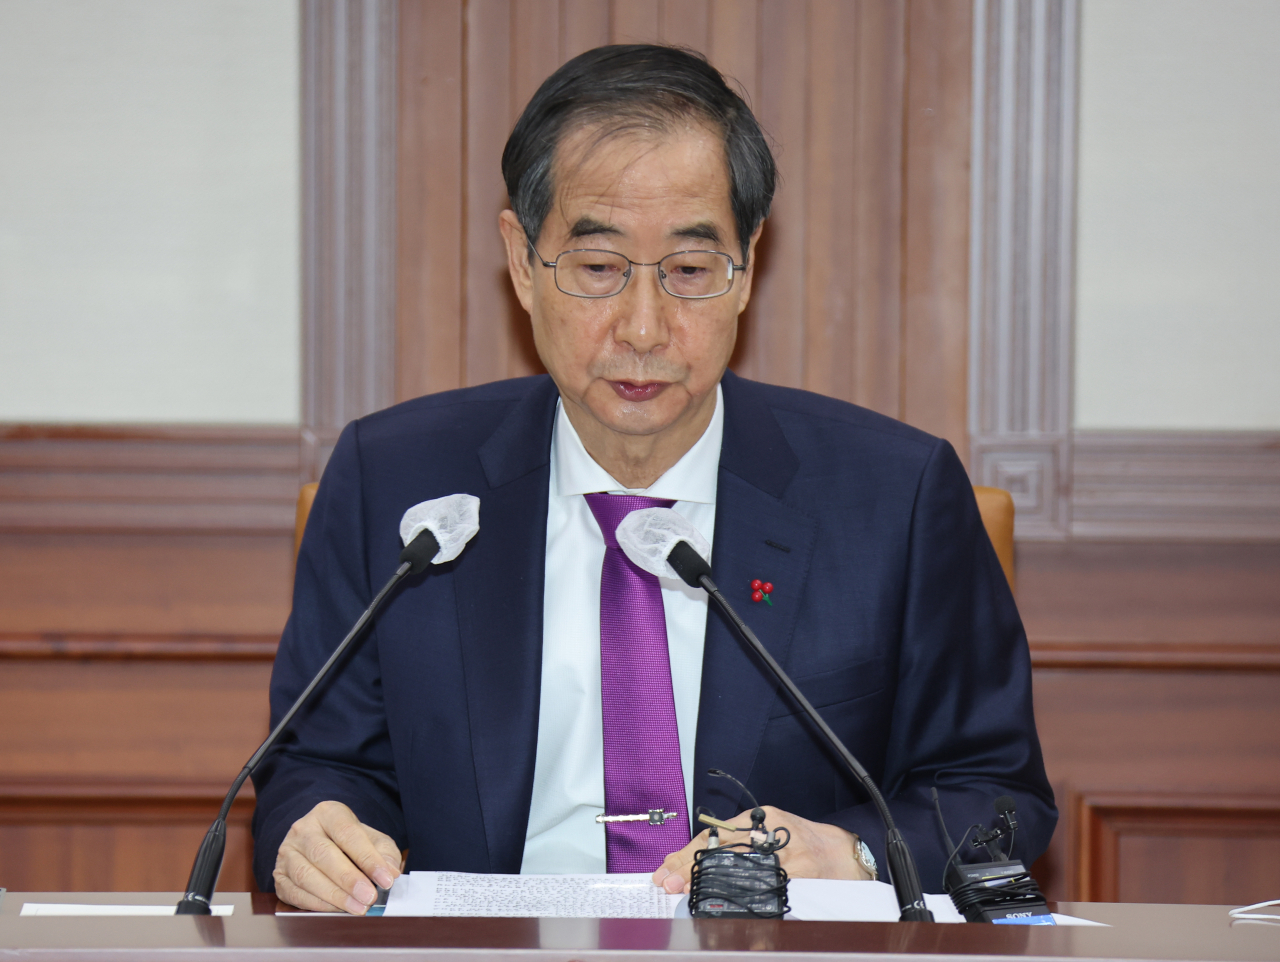 Prime Minister Han Duck-soo presides over a governmental meeting held Thursday, at which the Trade Ministry made an announcement on easing regulatory hurdles for foreign invested firms in Korea. (Yonhap)